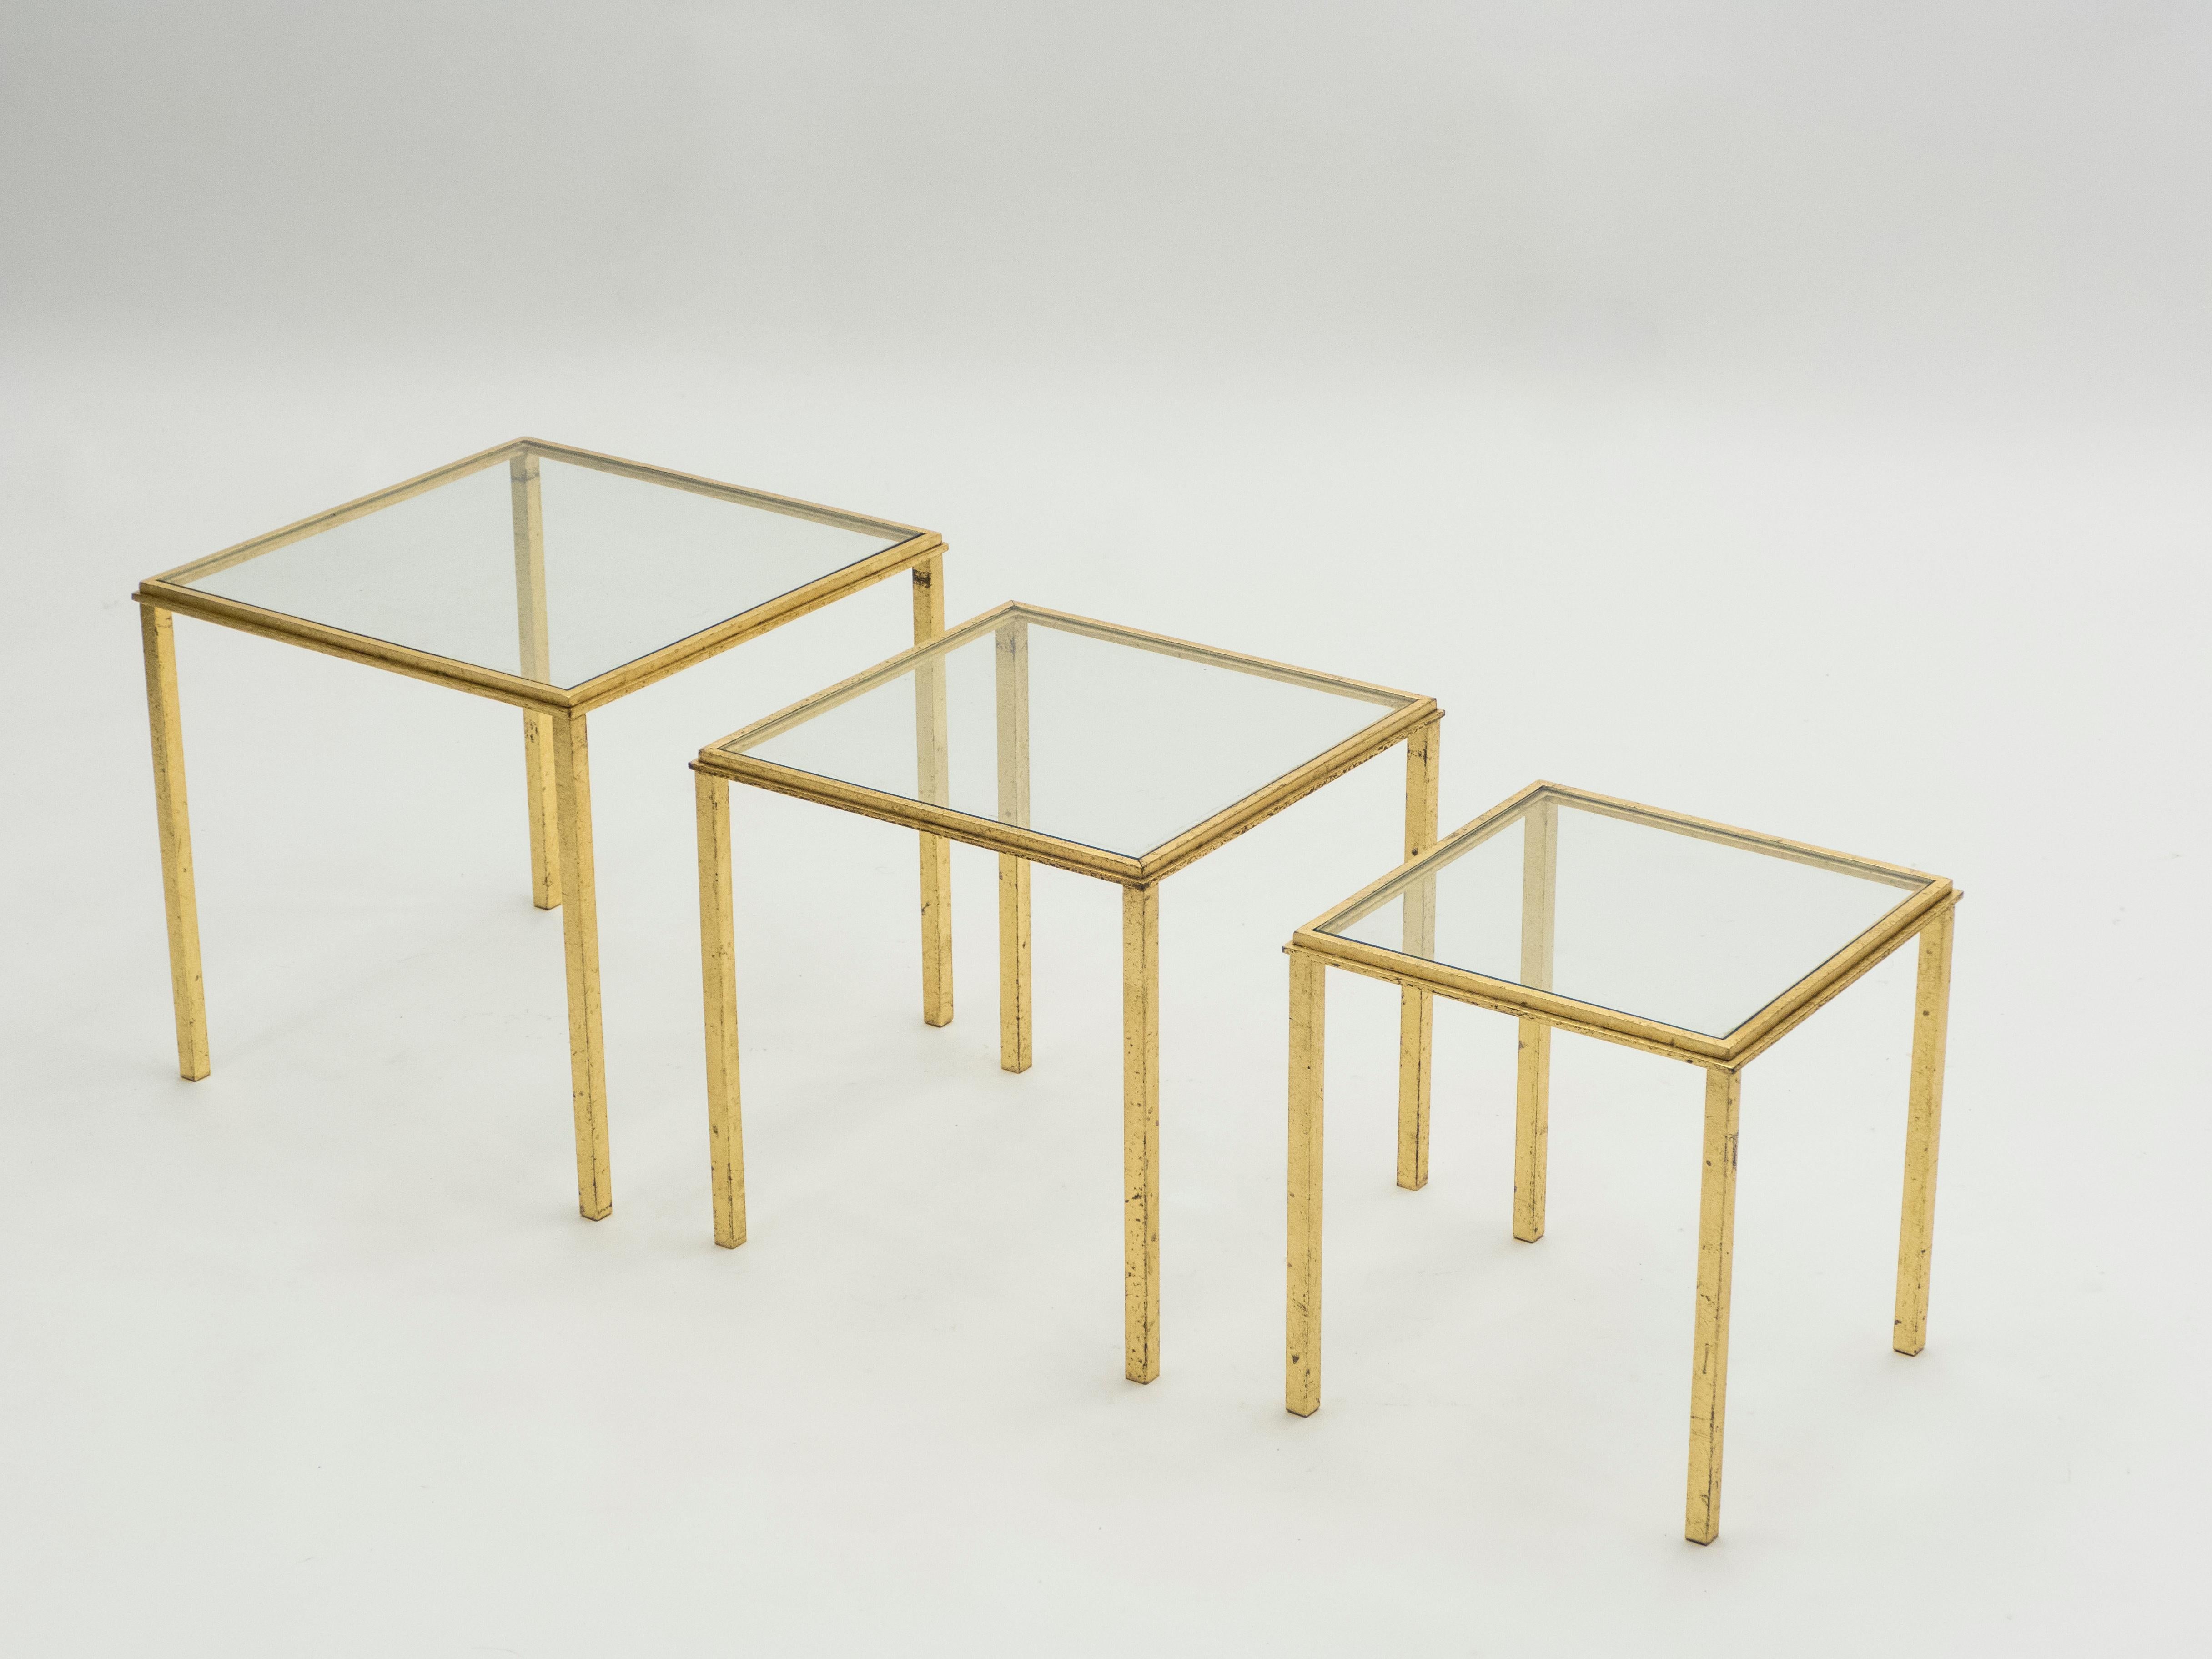 French Midcentury Roger Thibier Gilt Wrought Iron Gold Leaf Nesting Tables, 1960s